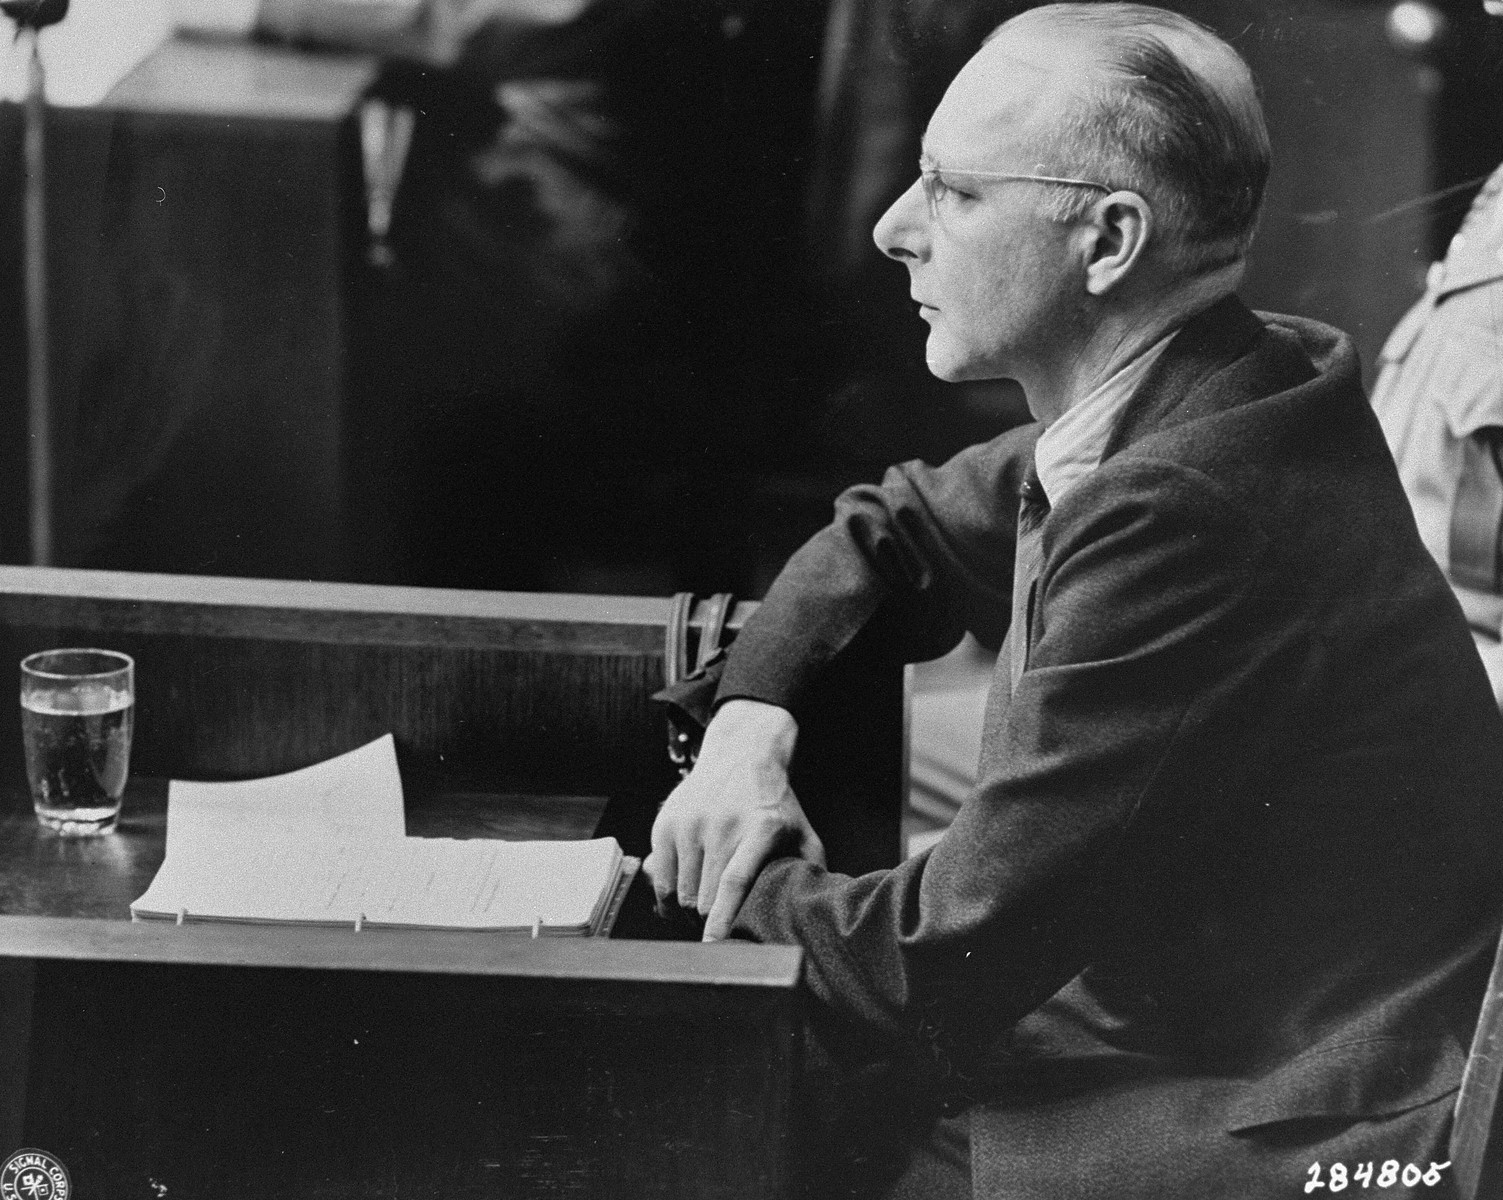 Victor Brack on the first day of his testimony in his own defense during the Doctors Trial.  

Brack served as the Chief Administrative Officer of the Chancellery during the war.